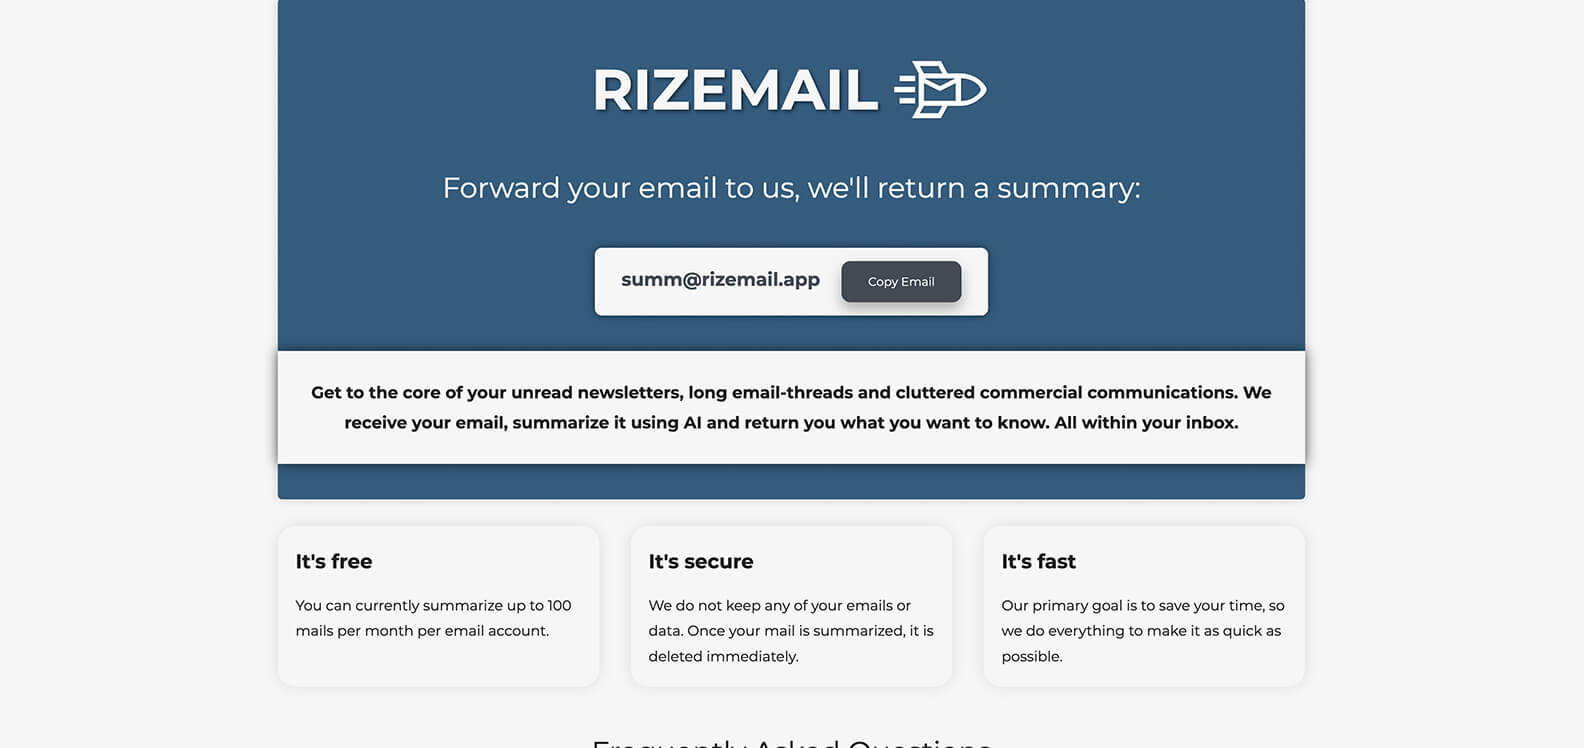 Post: Rizemail